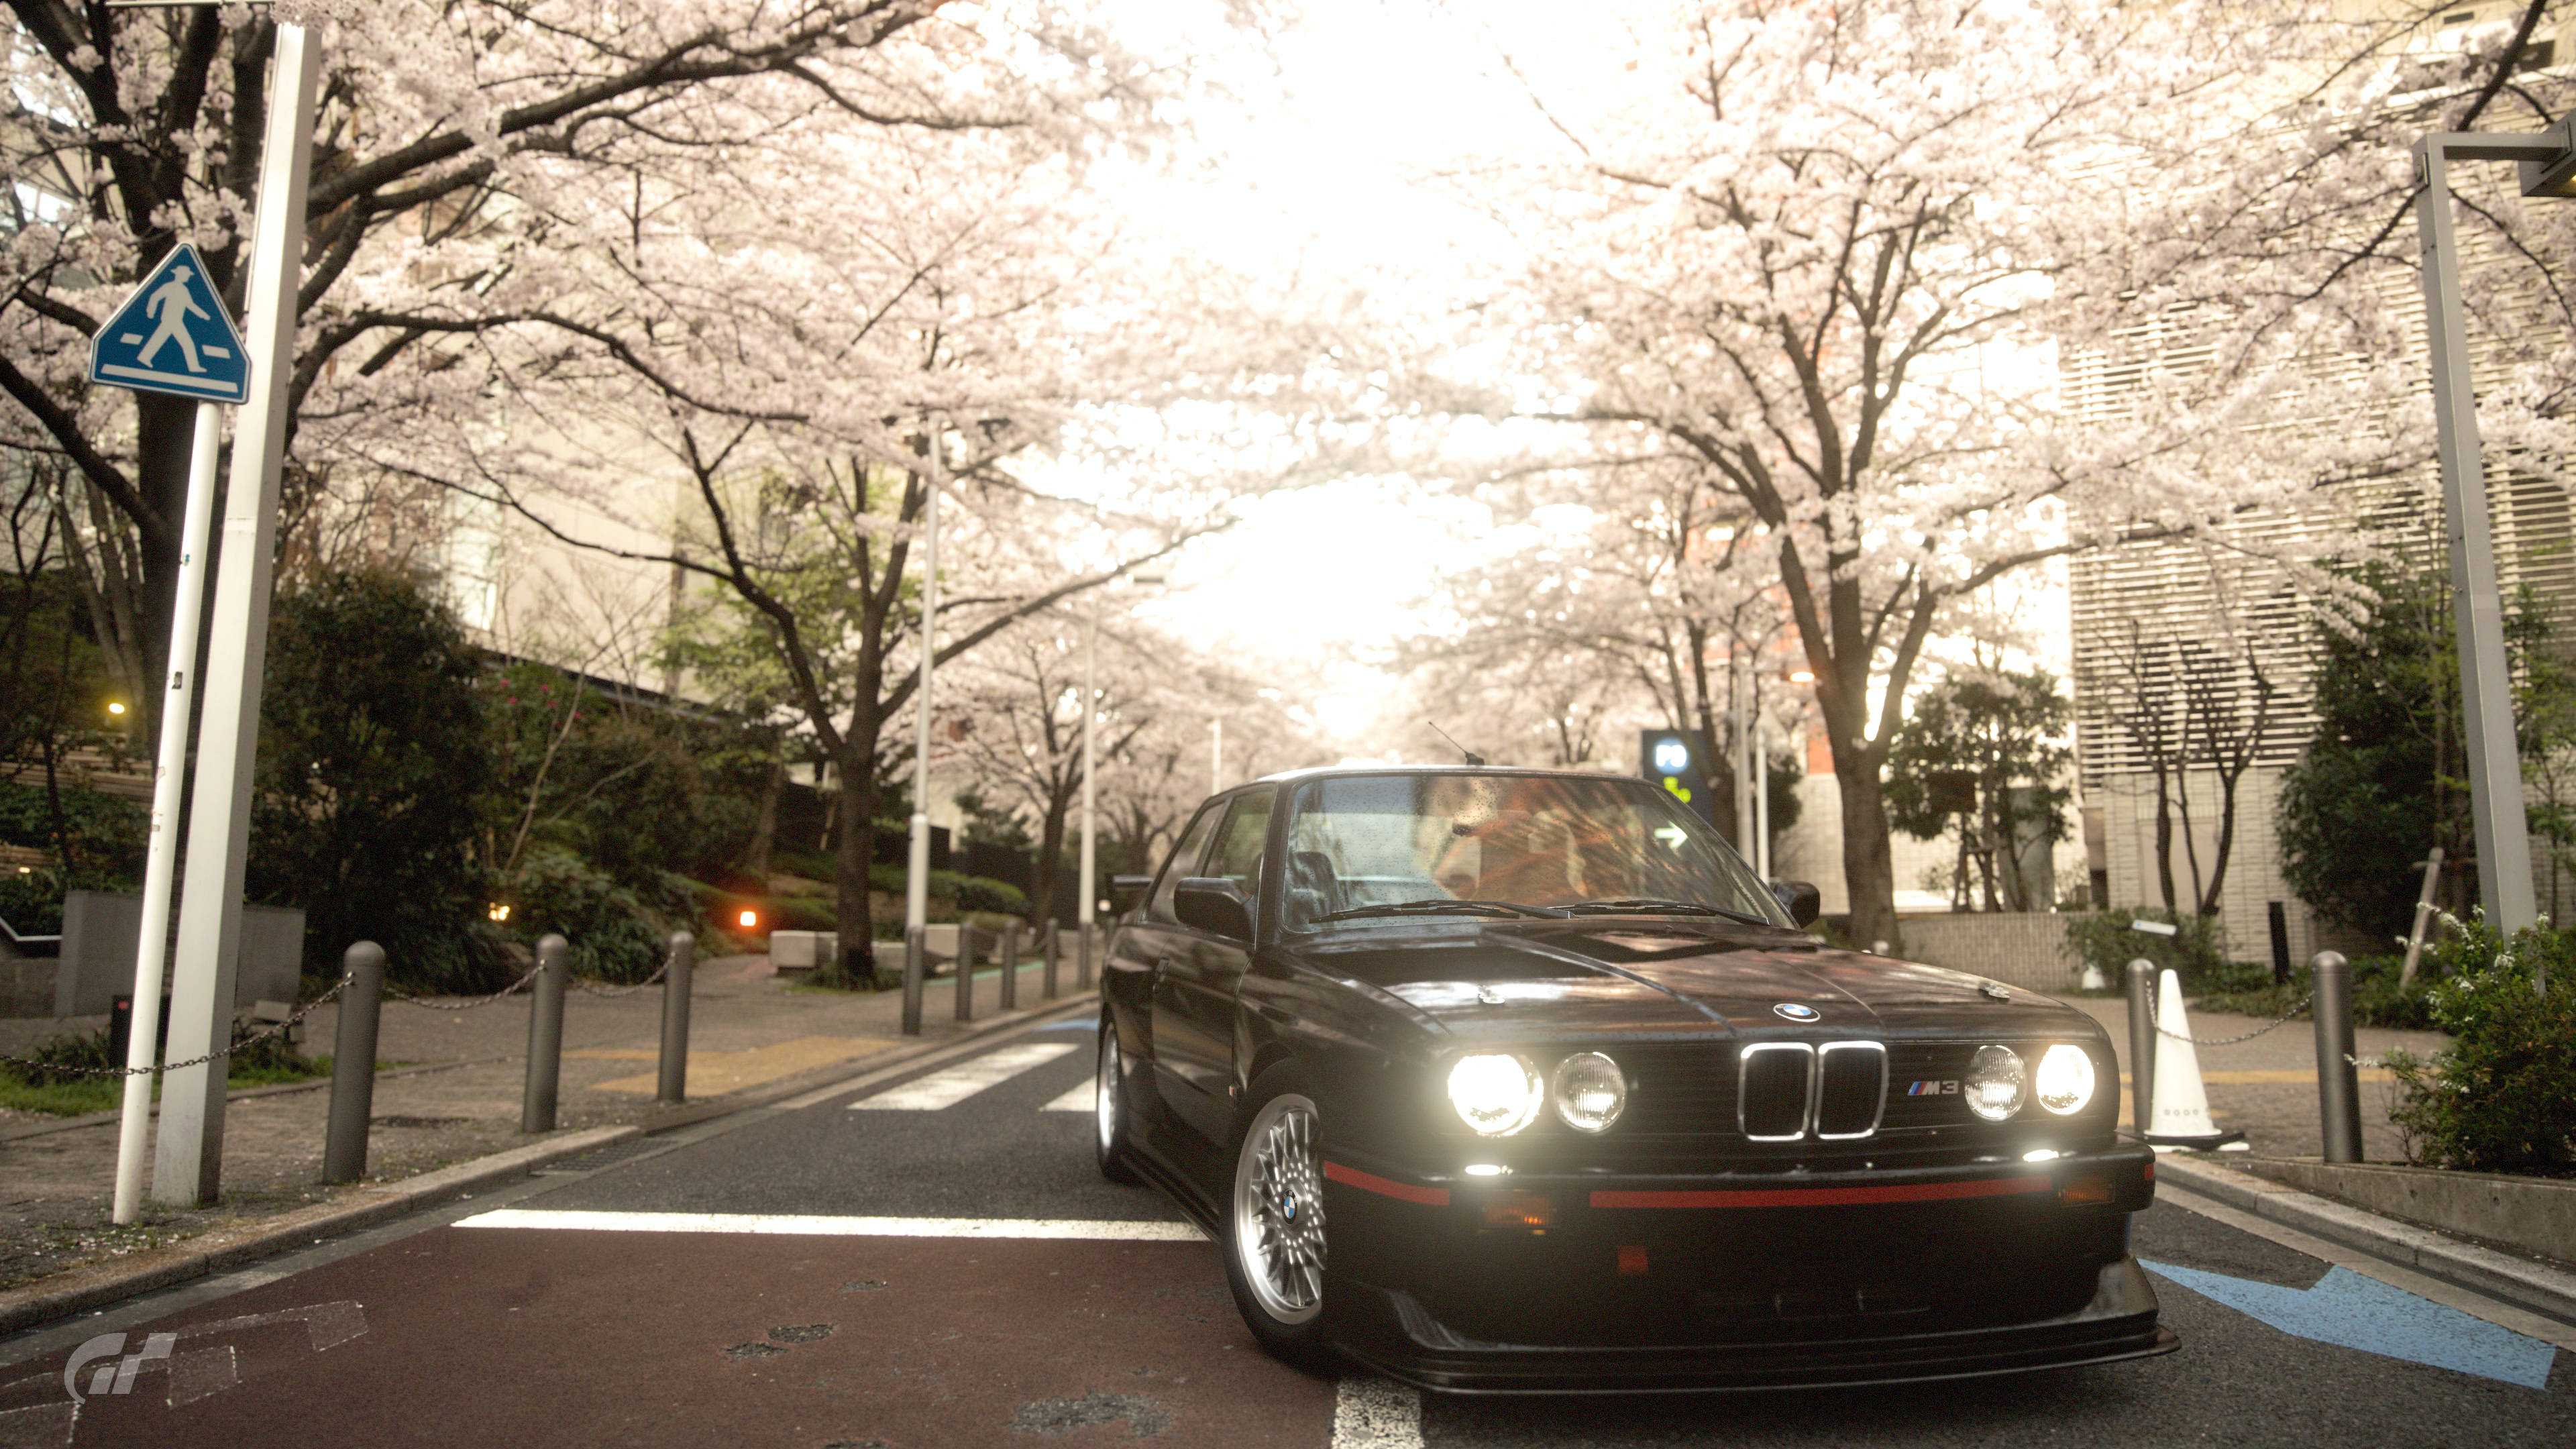 Car Vehicle Japan Spring Cherry Blossom BMW Video Games Street Tokyo Daylight Gran Turismo 7 Front A 3840x2160